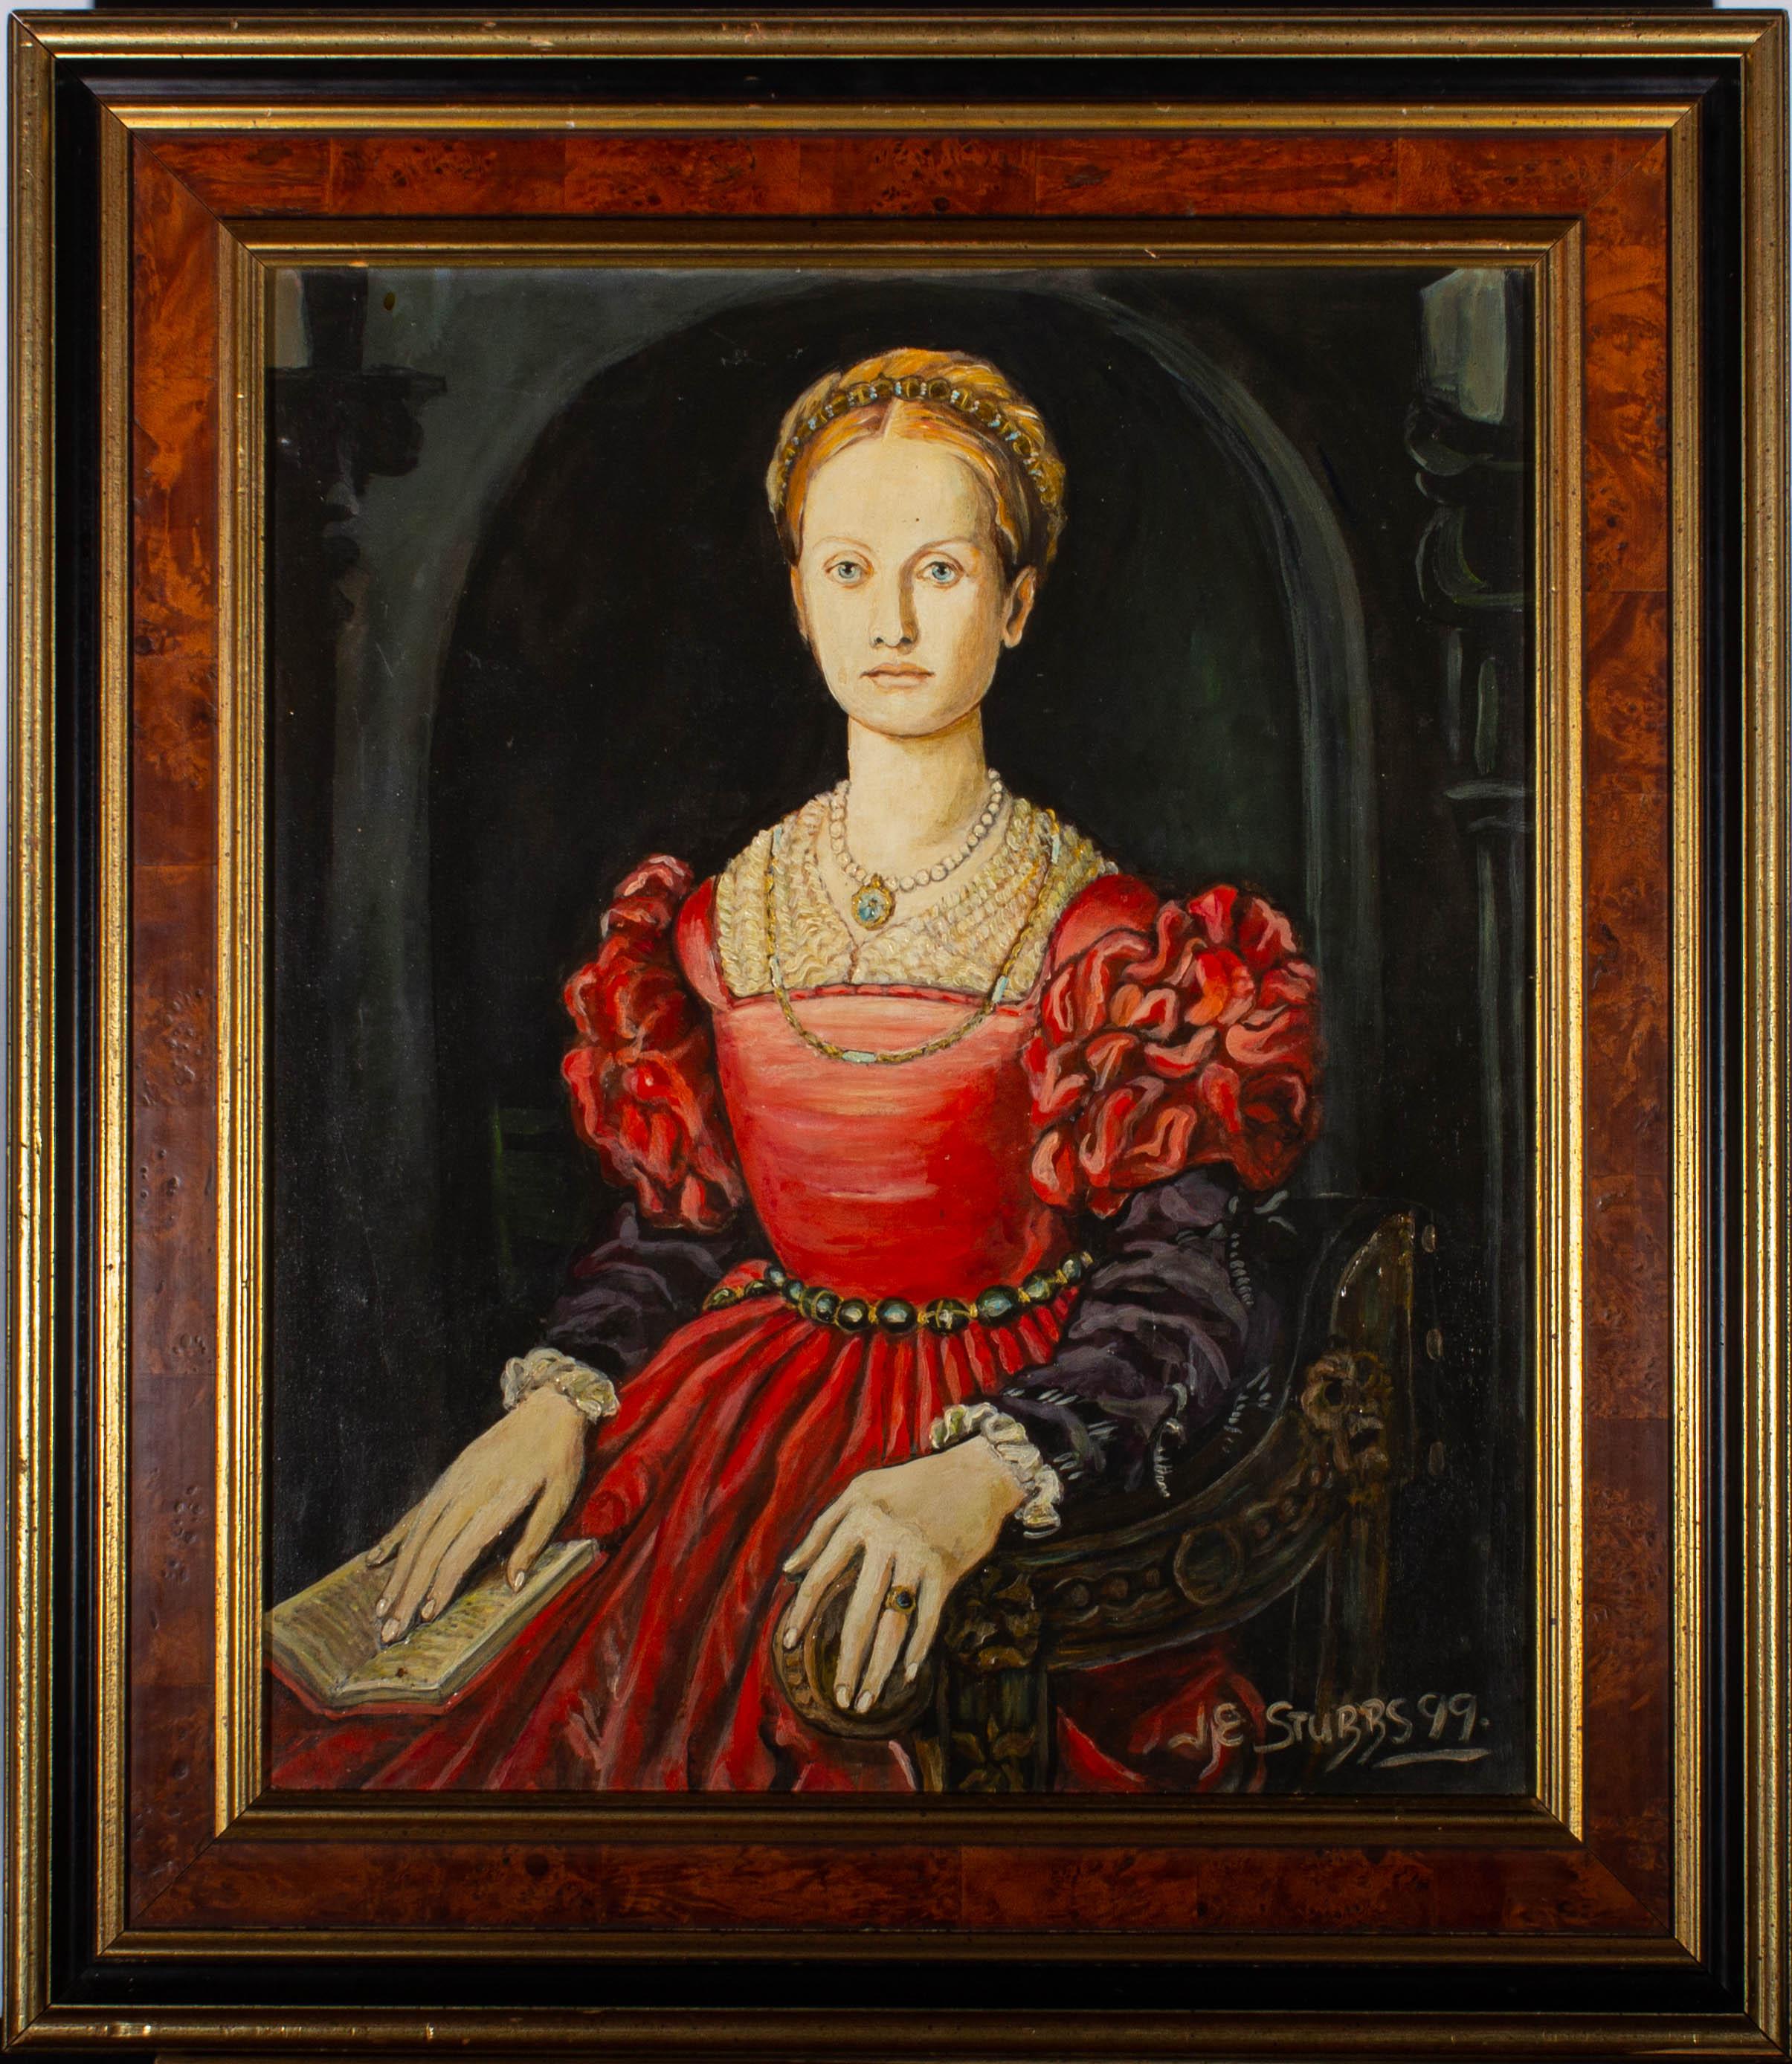 A fine contemporary copy of the original portrait of Lucrezia Panciatichi by Agnolo di Cosimo, known as Bronzino. The artist has signed and dated to the lower right corner and the painting is presented in a very fine contemporary frame with brushed